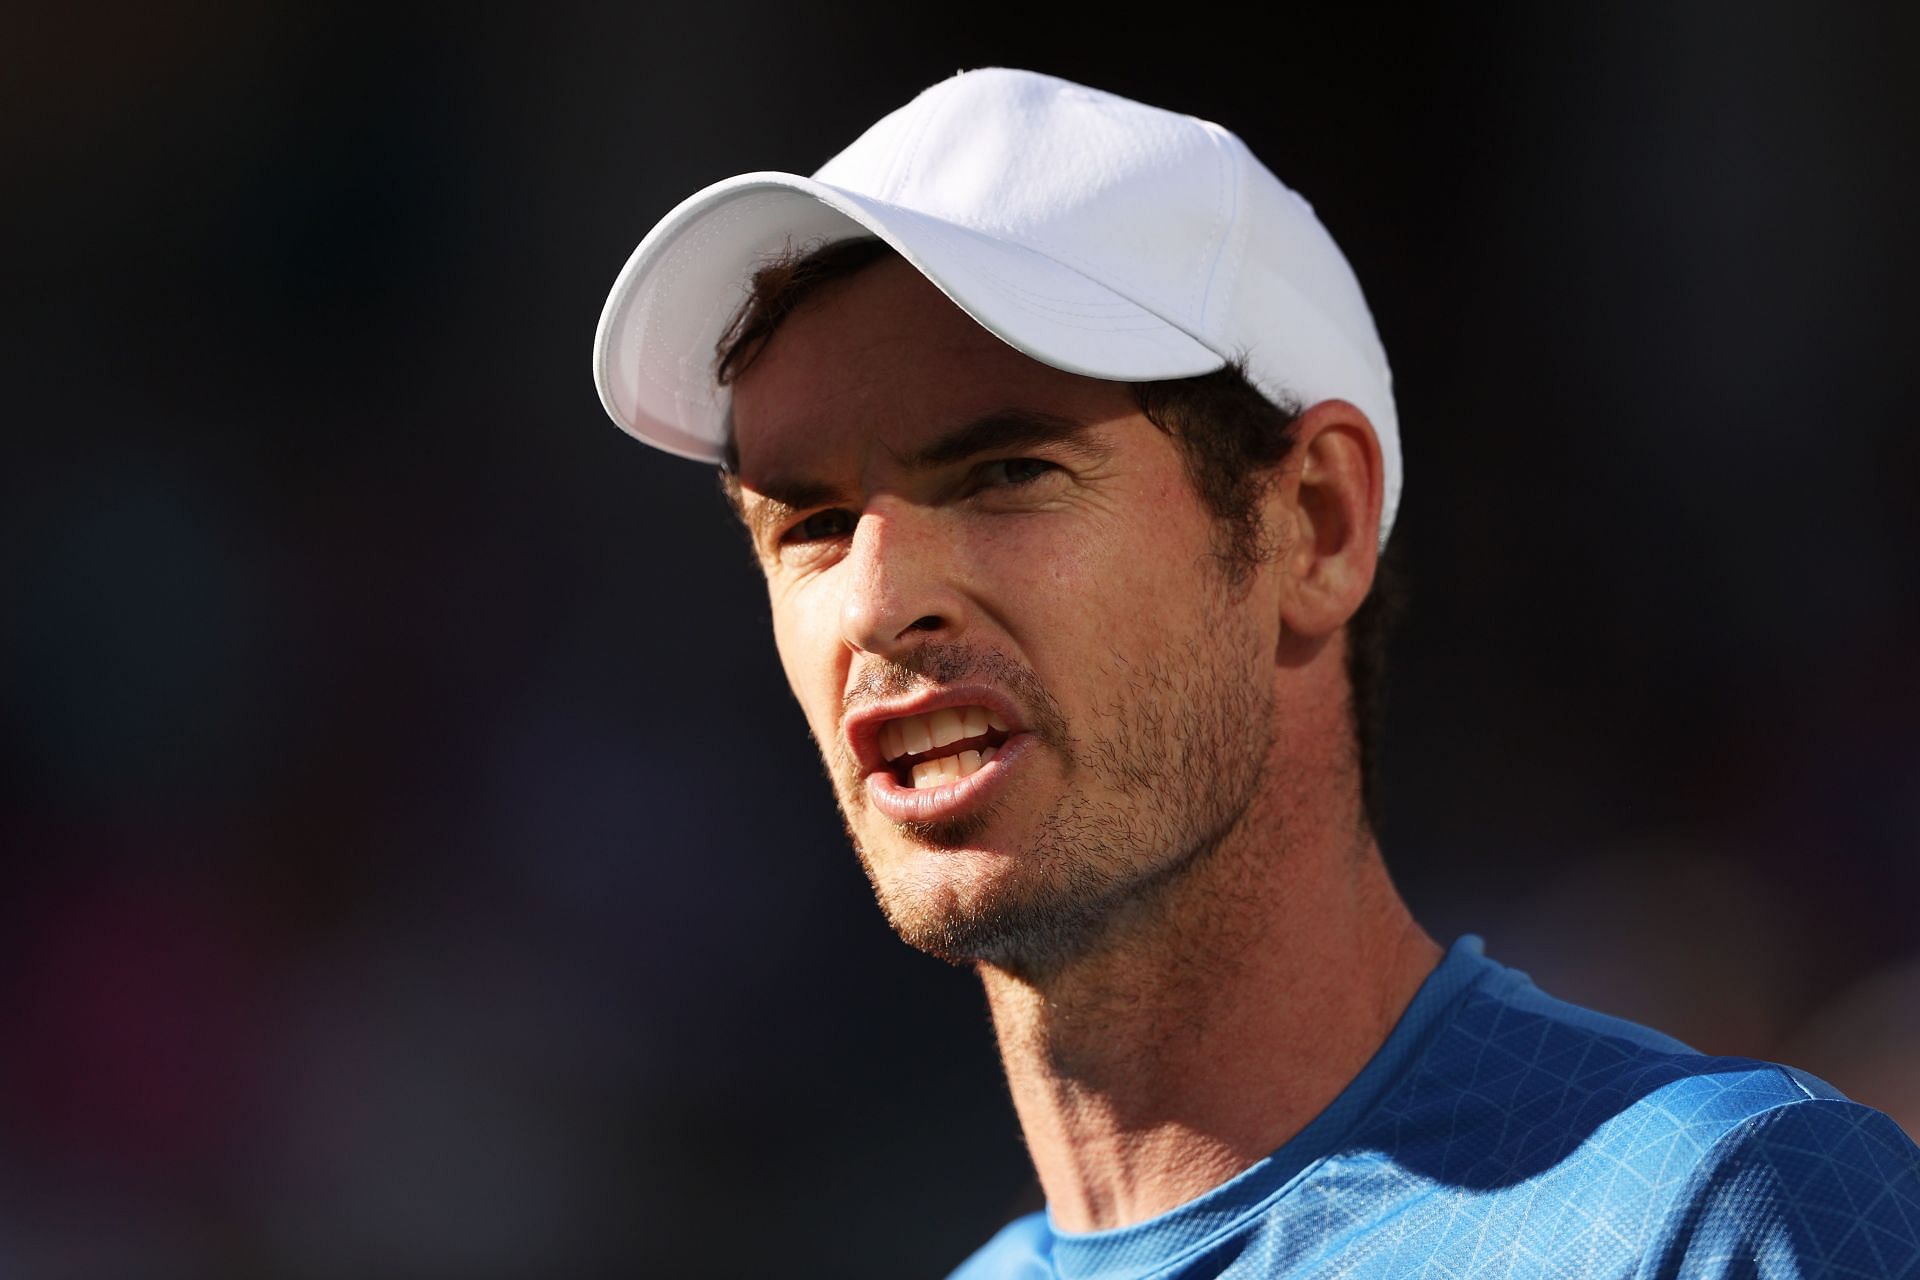 Andy Murray during his match against Carlos Alcaraz at the BNP Paribas Open